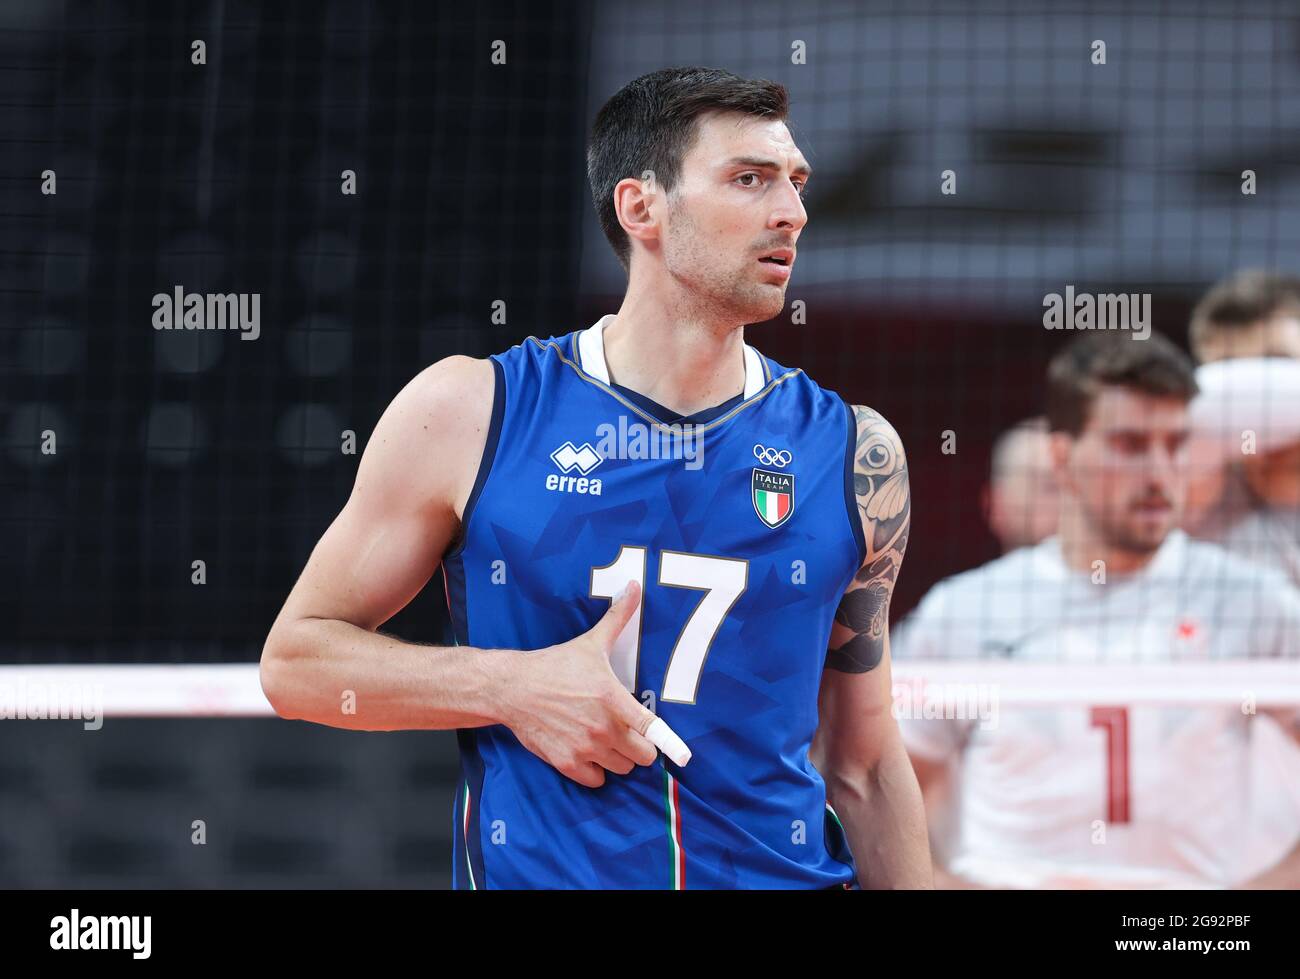 Dongjing. 24th July, 2021. Simone Anzani of Italy reacts during the men's volleyball preliminary round match between Italy and Canada at Tokyo 2020 Olympic Games in Tokyo, July 24, 2021. Credit: Ding Ting/Xinhua/Alamy Live News Stock Photo